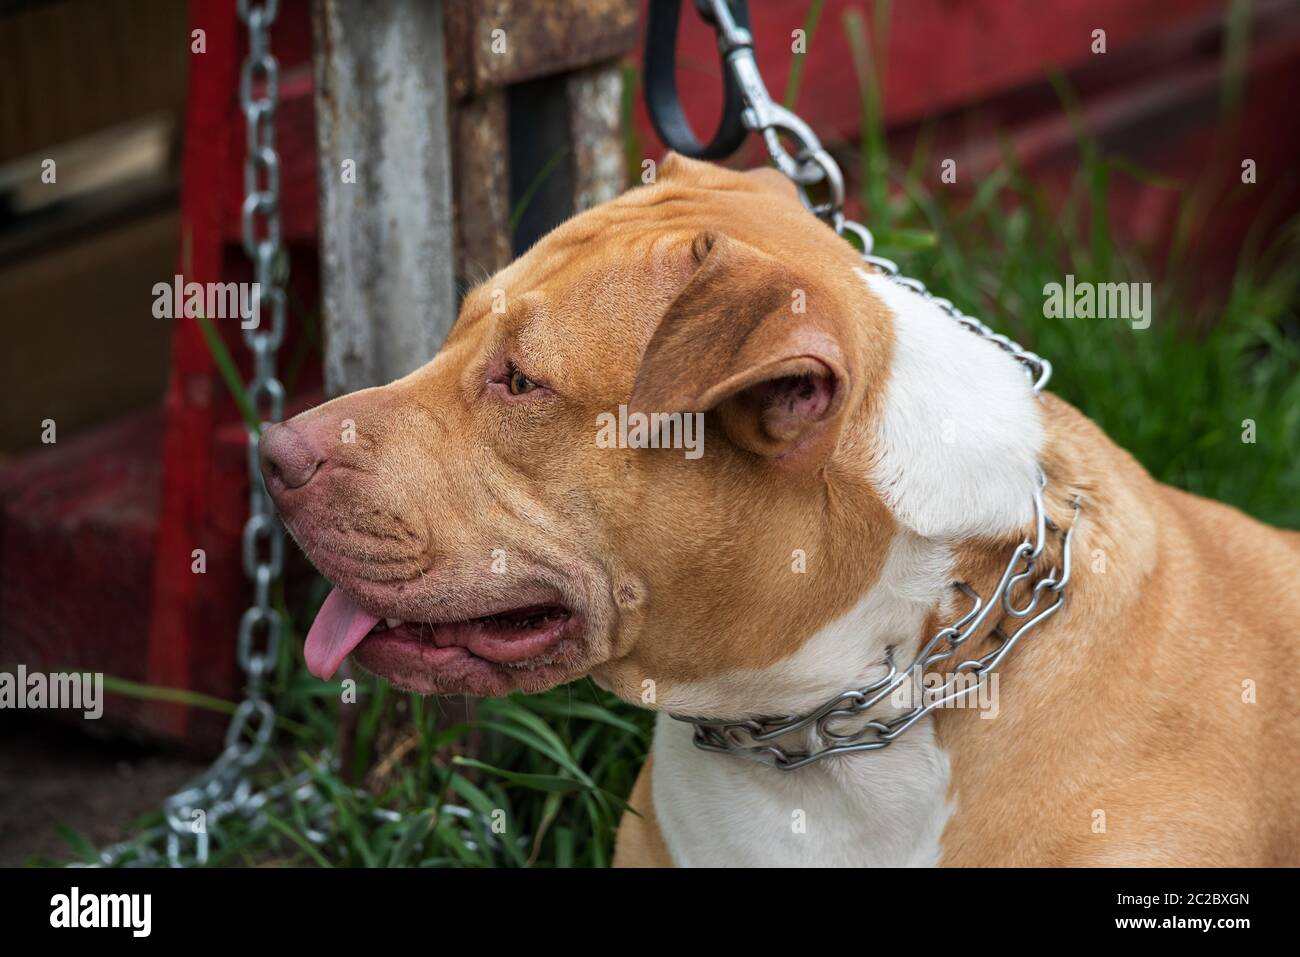 A large brown dog on a chainmail pinned up with a chain. Close up of the animal's head. Stock Photo